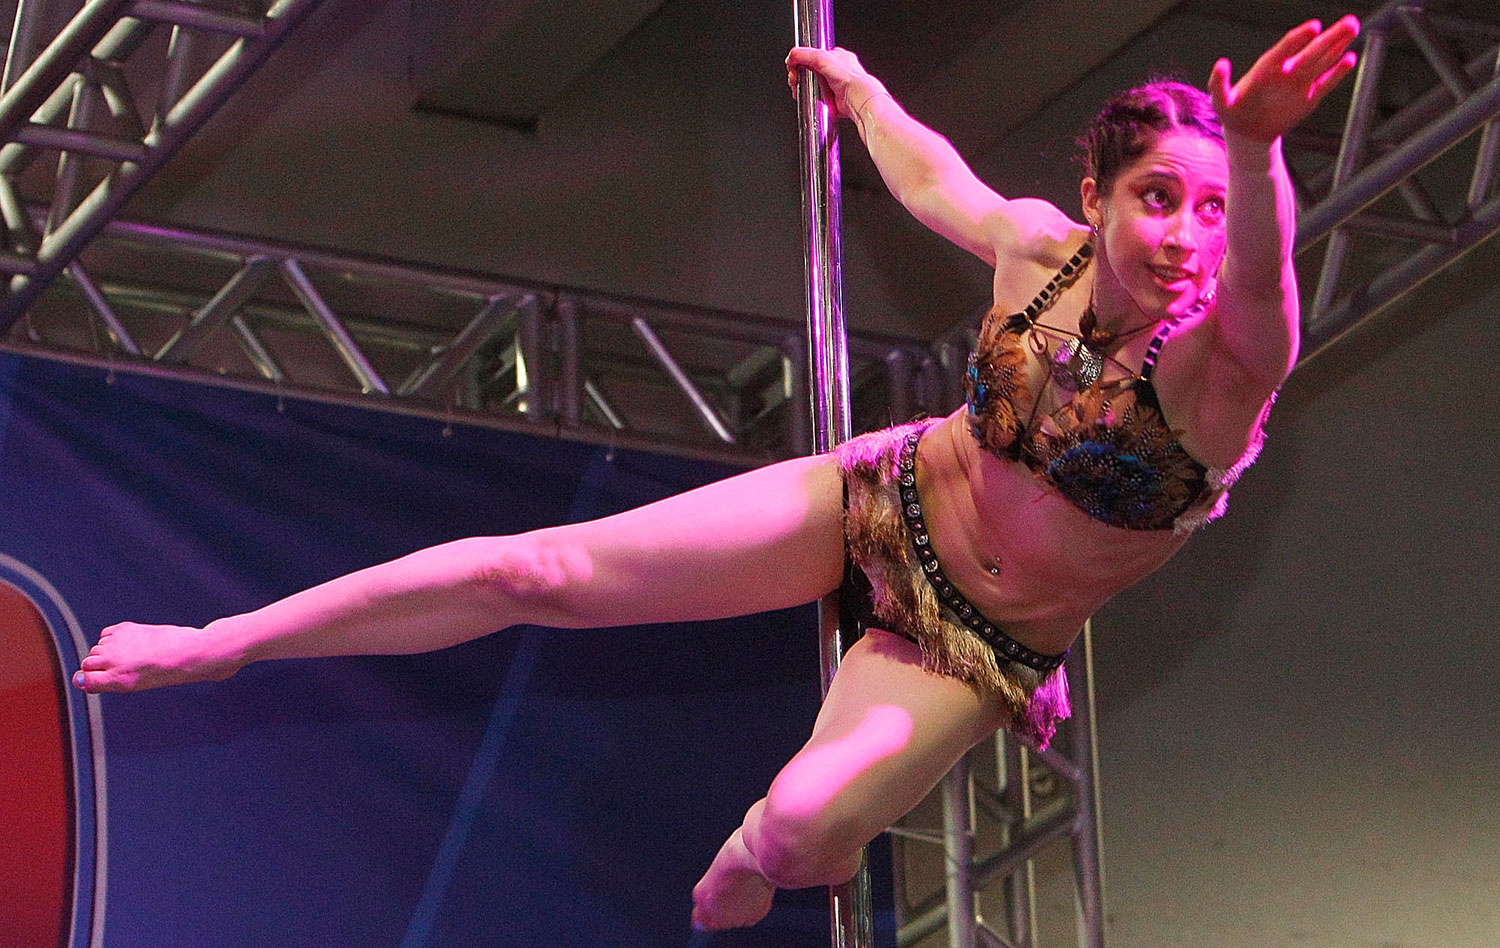 “Wild” Canadian wins pole dancing competition at Arnold Fair